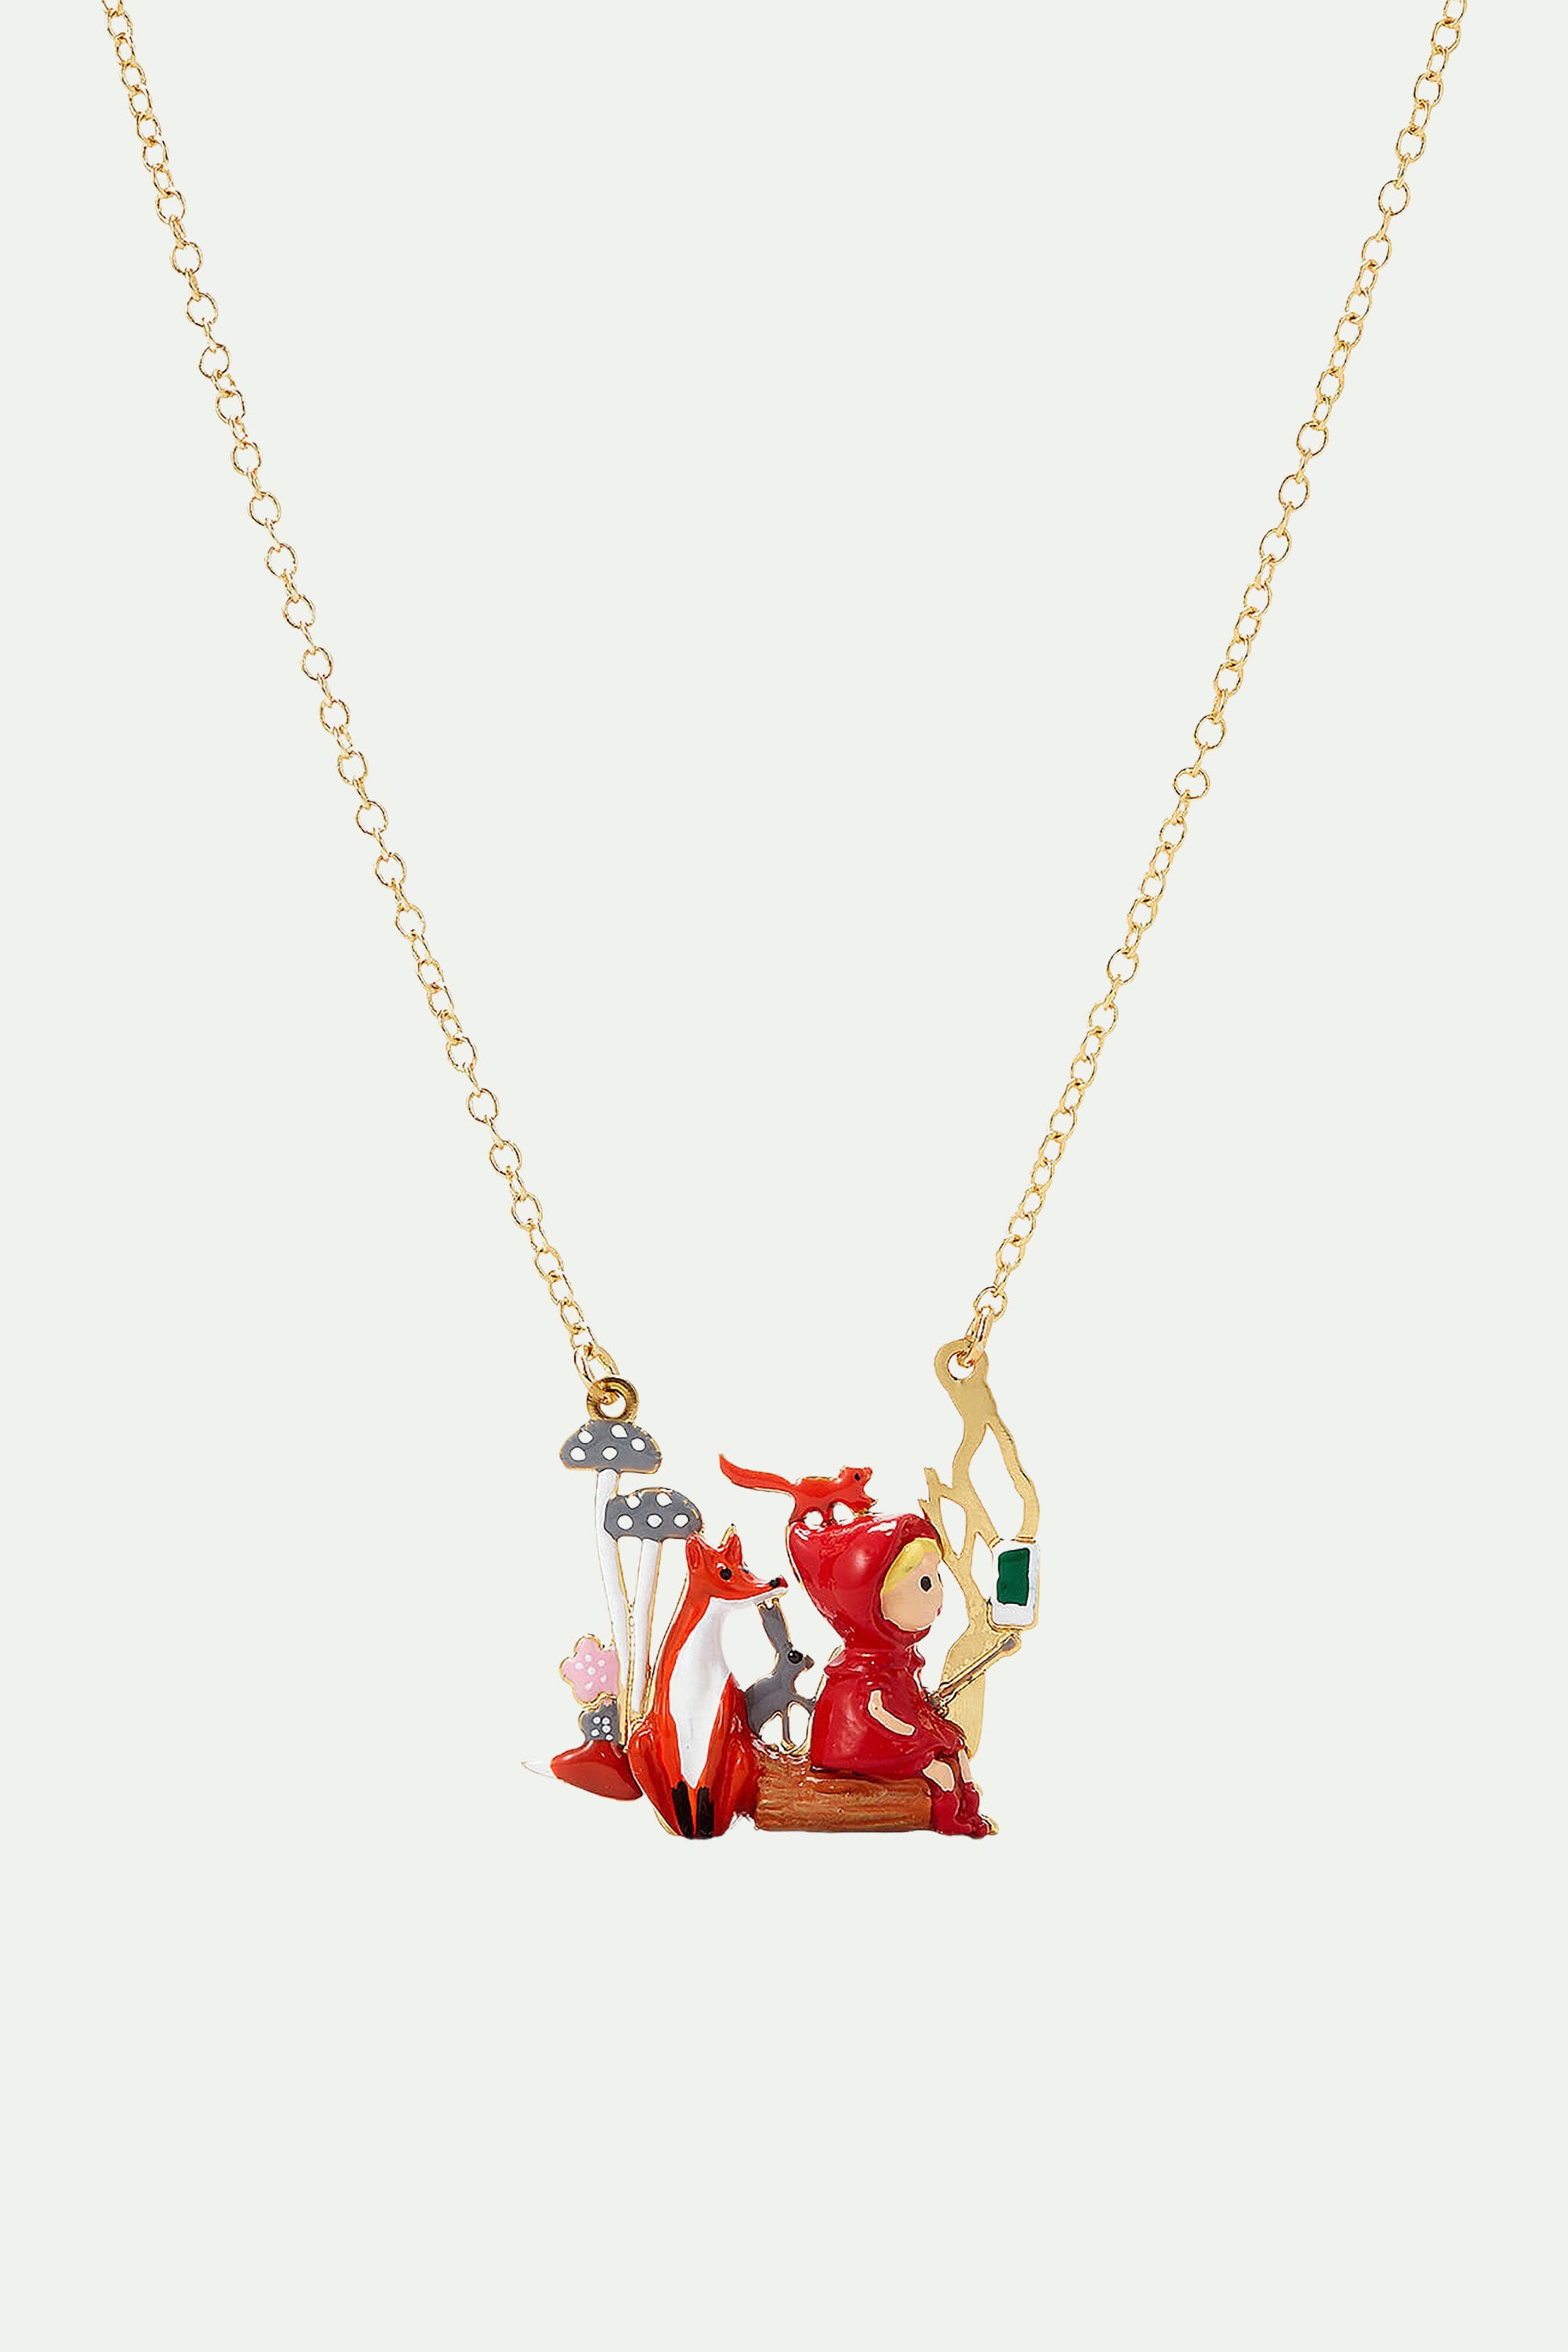 Little Red Riding Hood, Fox and Rabbit pendant necklace